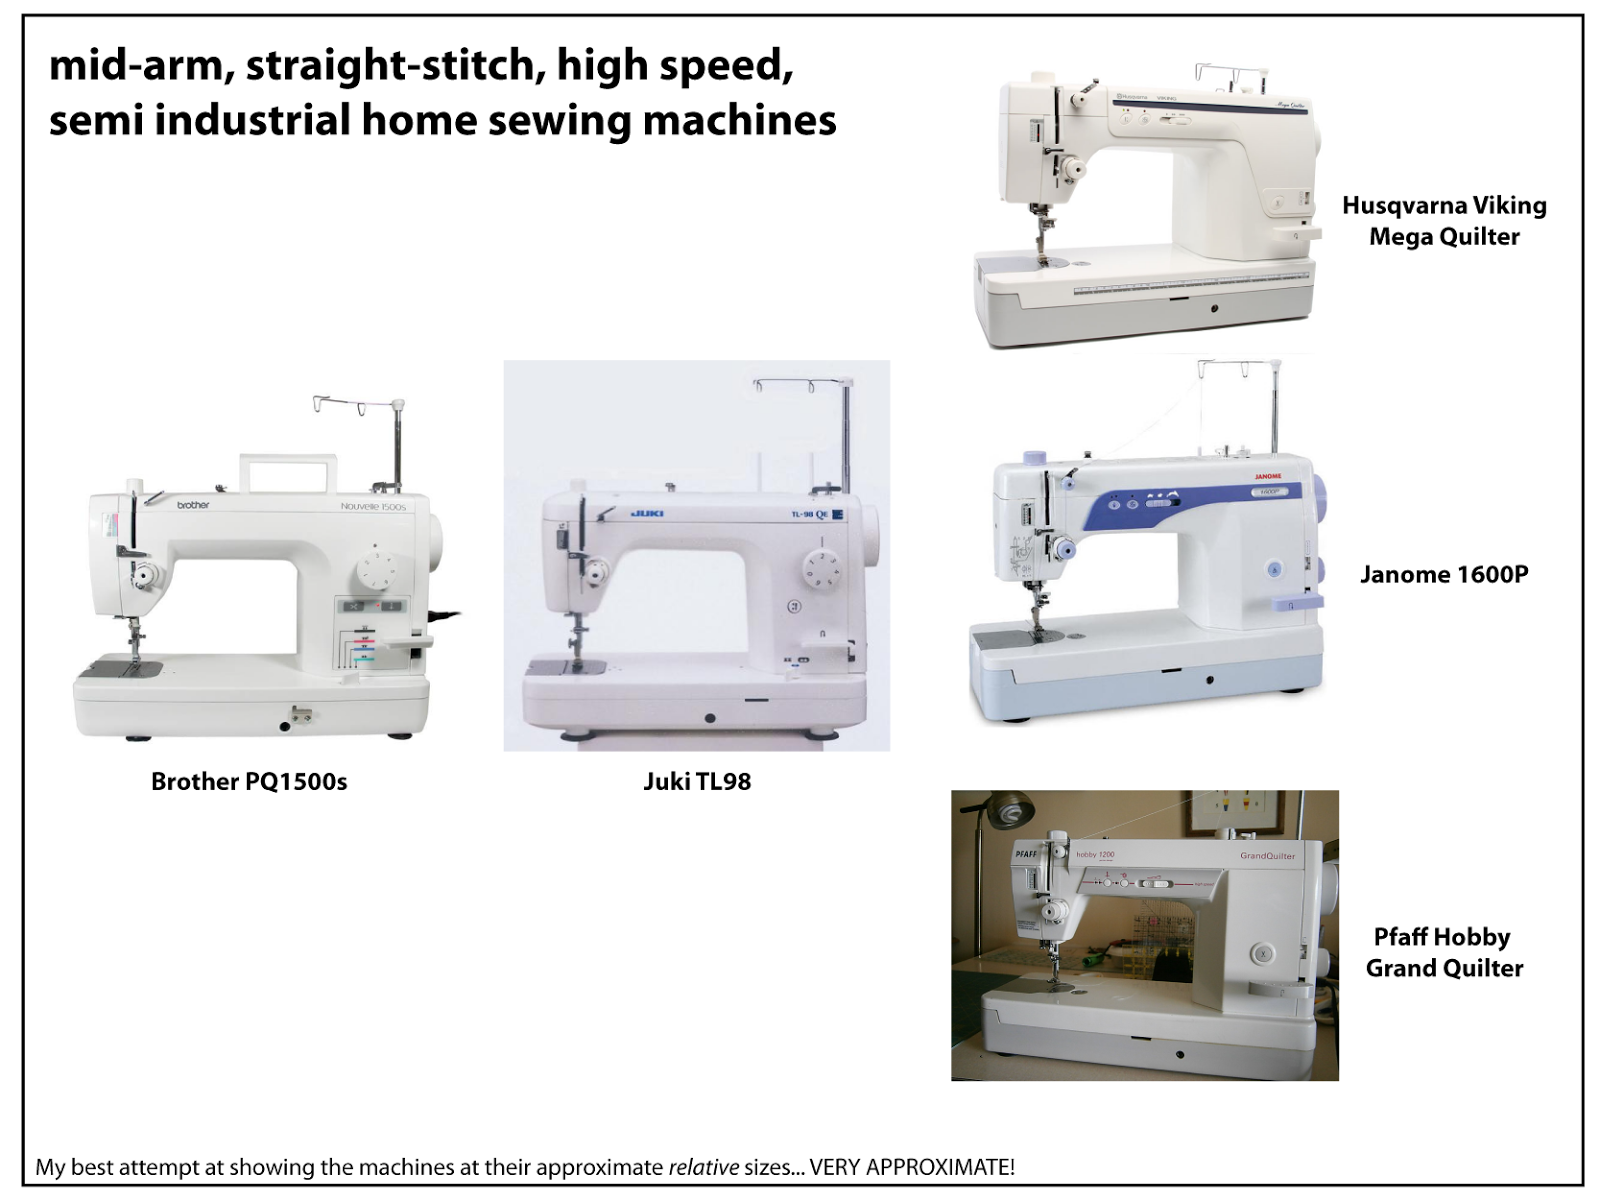 2 Year Review Of The Juki TL2010Q Sewing Machine / Honest Review